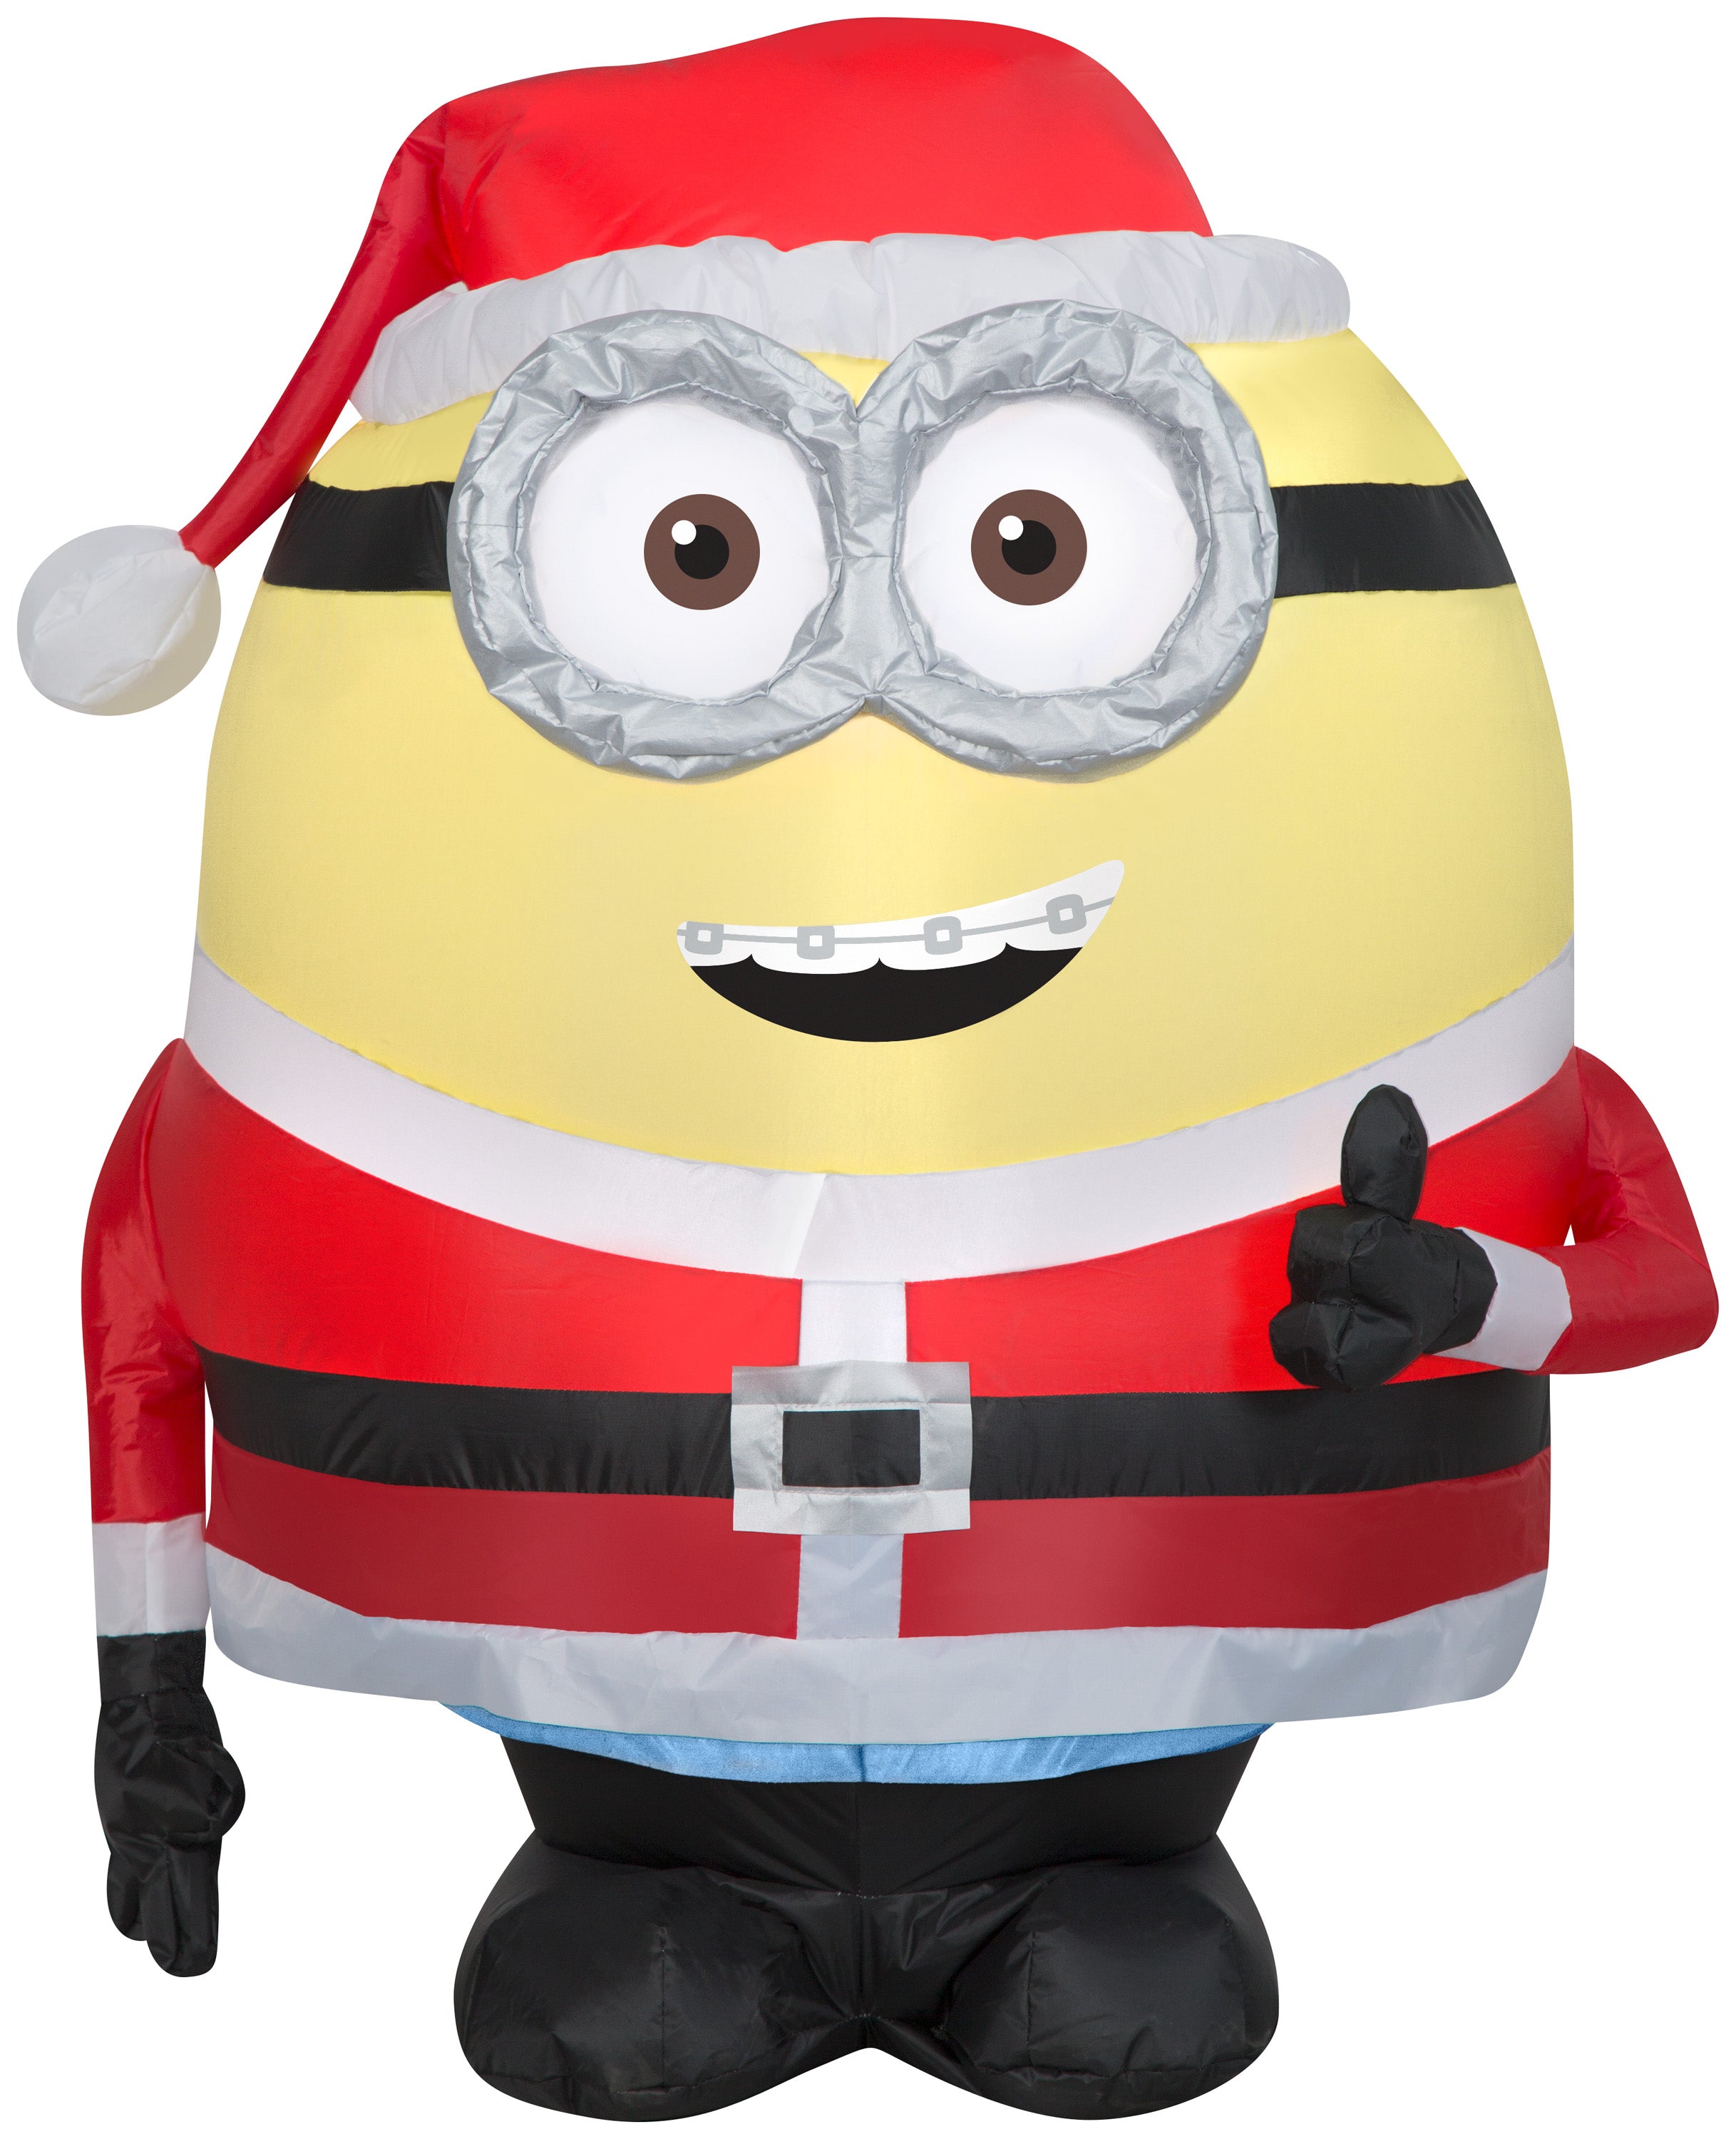 Gemmy Christmas Airblown Inflatable Inflatable Minion Otto in Santa Suit, 3 ft Tall, yellow